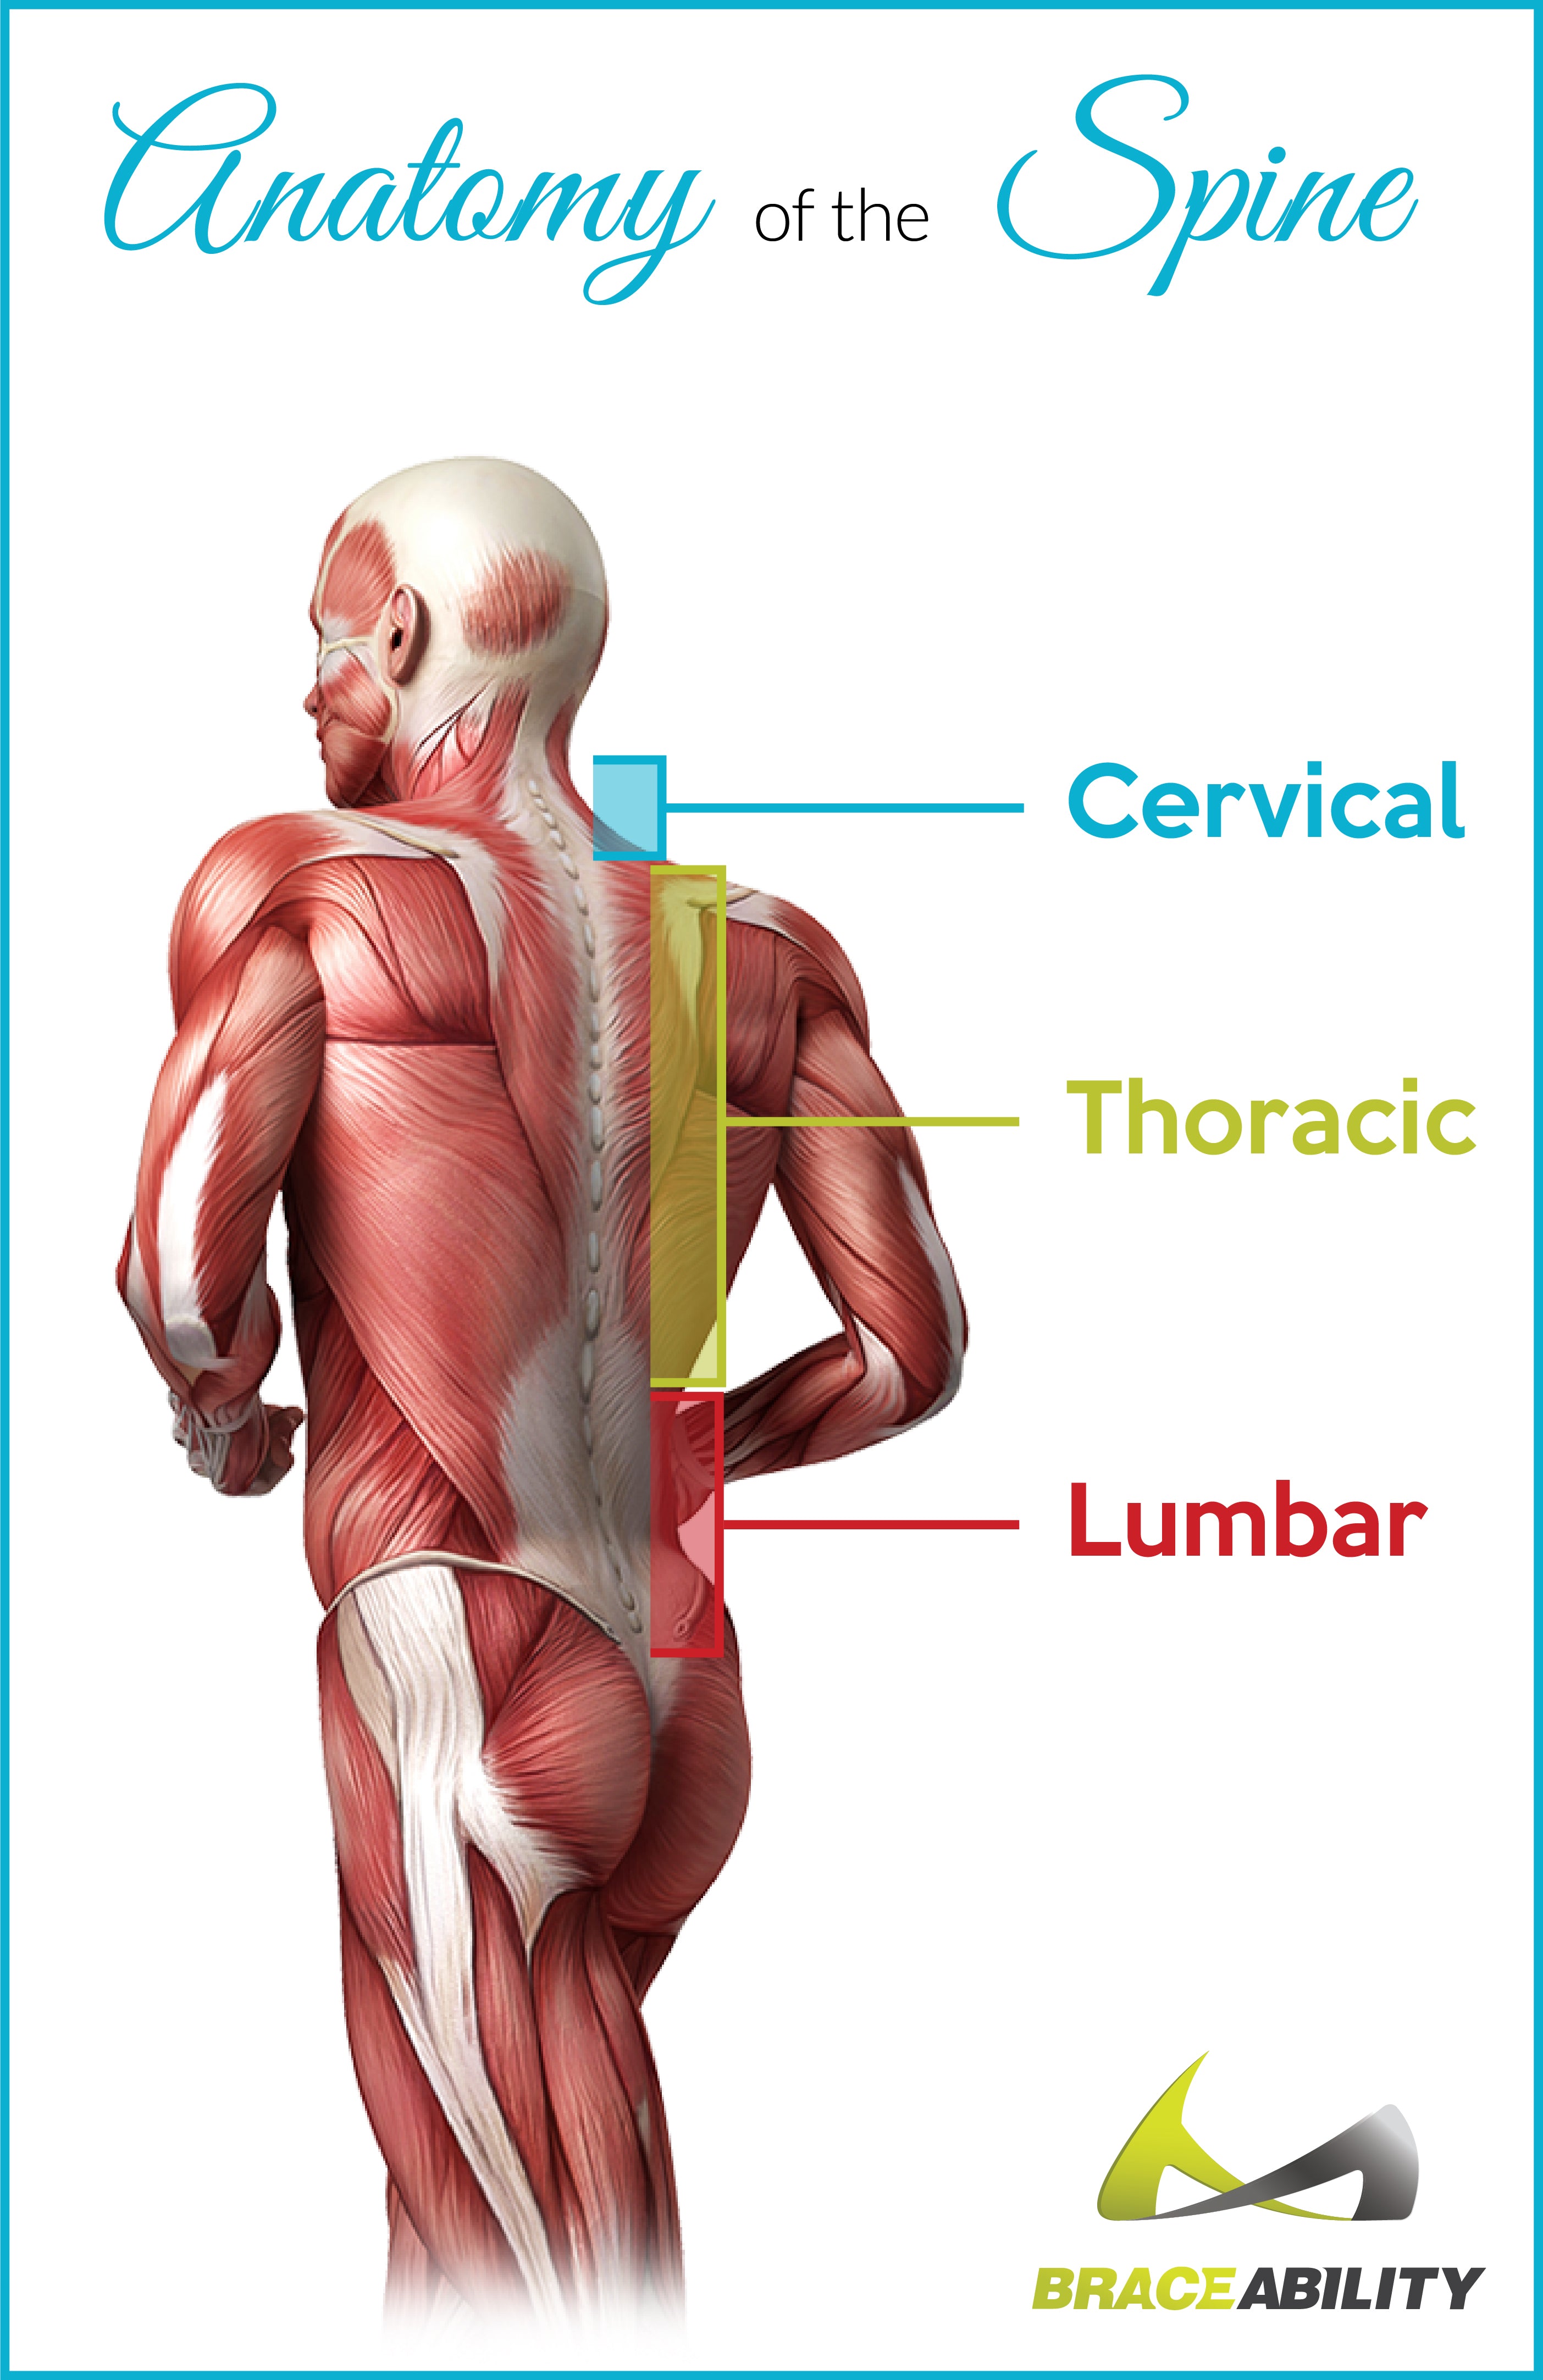 Thoracic Spine Neck & Back Pain | Symptoms, Causes & Treatment